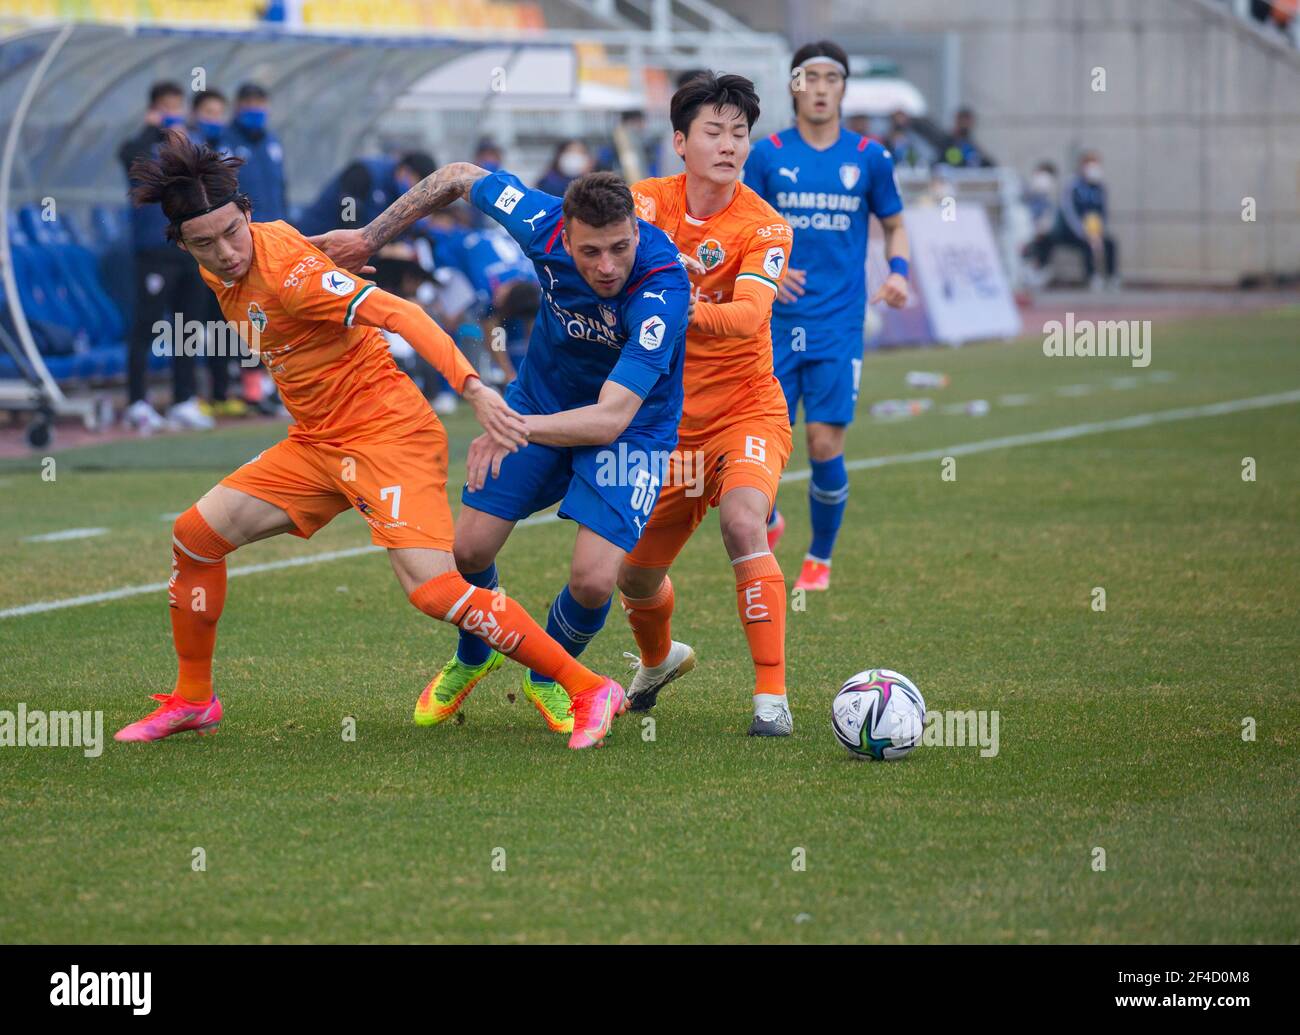 (L-R) Yun Suk-Young (L), Uros Deric of Suwon Samsung Bluewings and Kim Dong-Hyun of Gangwon FC in action during the 4th round of the 2021 K League 1 soccer match between Suwon Samsung Bluewings and Gangwon FC at the Suwon World Cup Stadium.Final score; Suwon Samsung Bluewings 1:1 Gangwon FC. Stock Photo